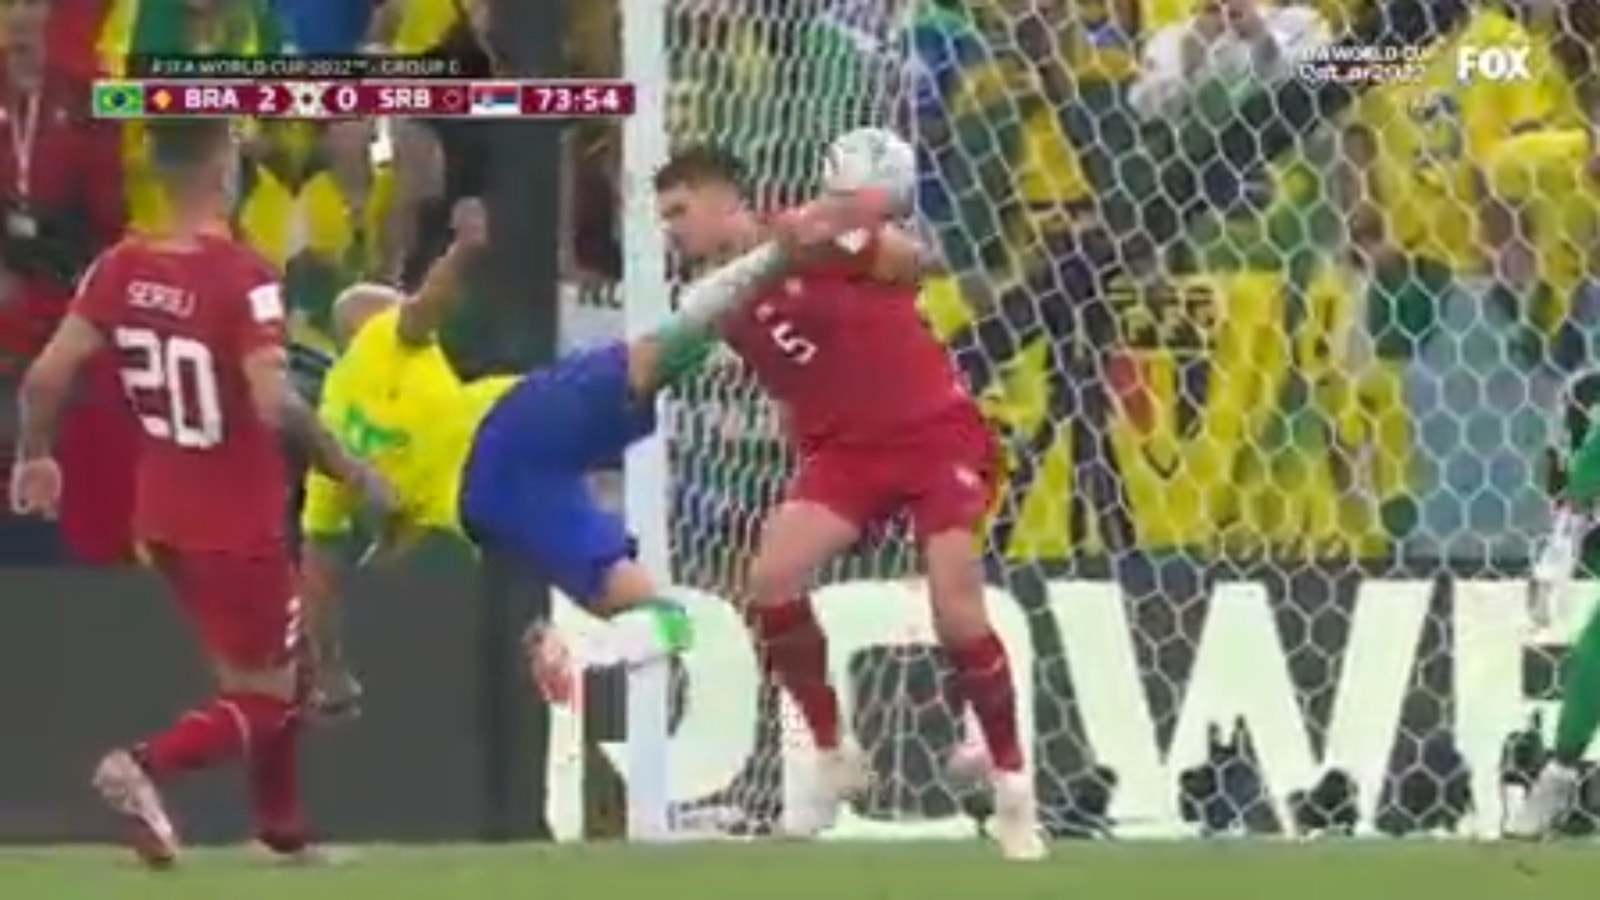 Richarlison puts Brazil 2-0 ahead with an acrobatic goal in 73 minutes